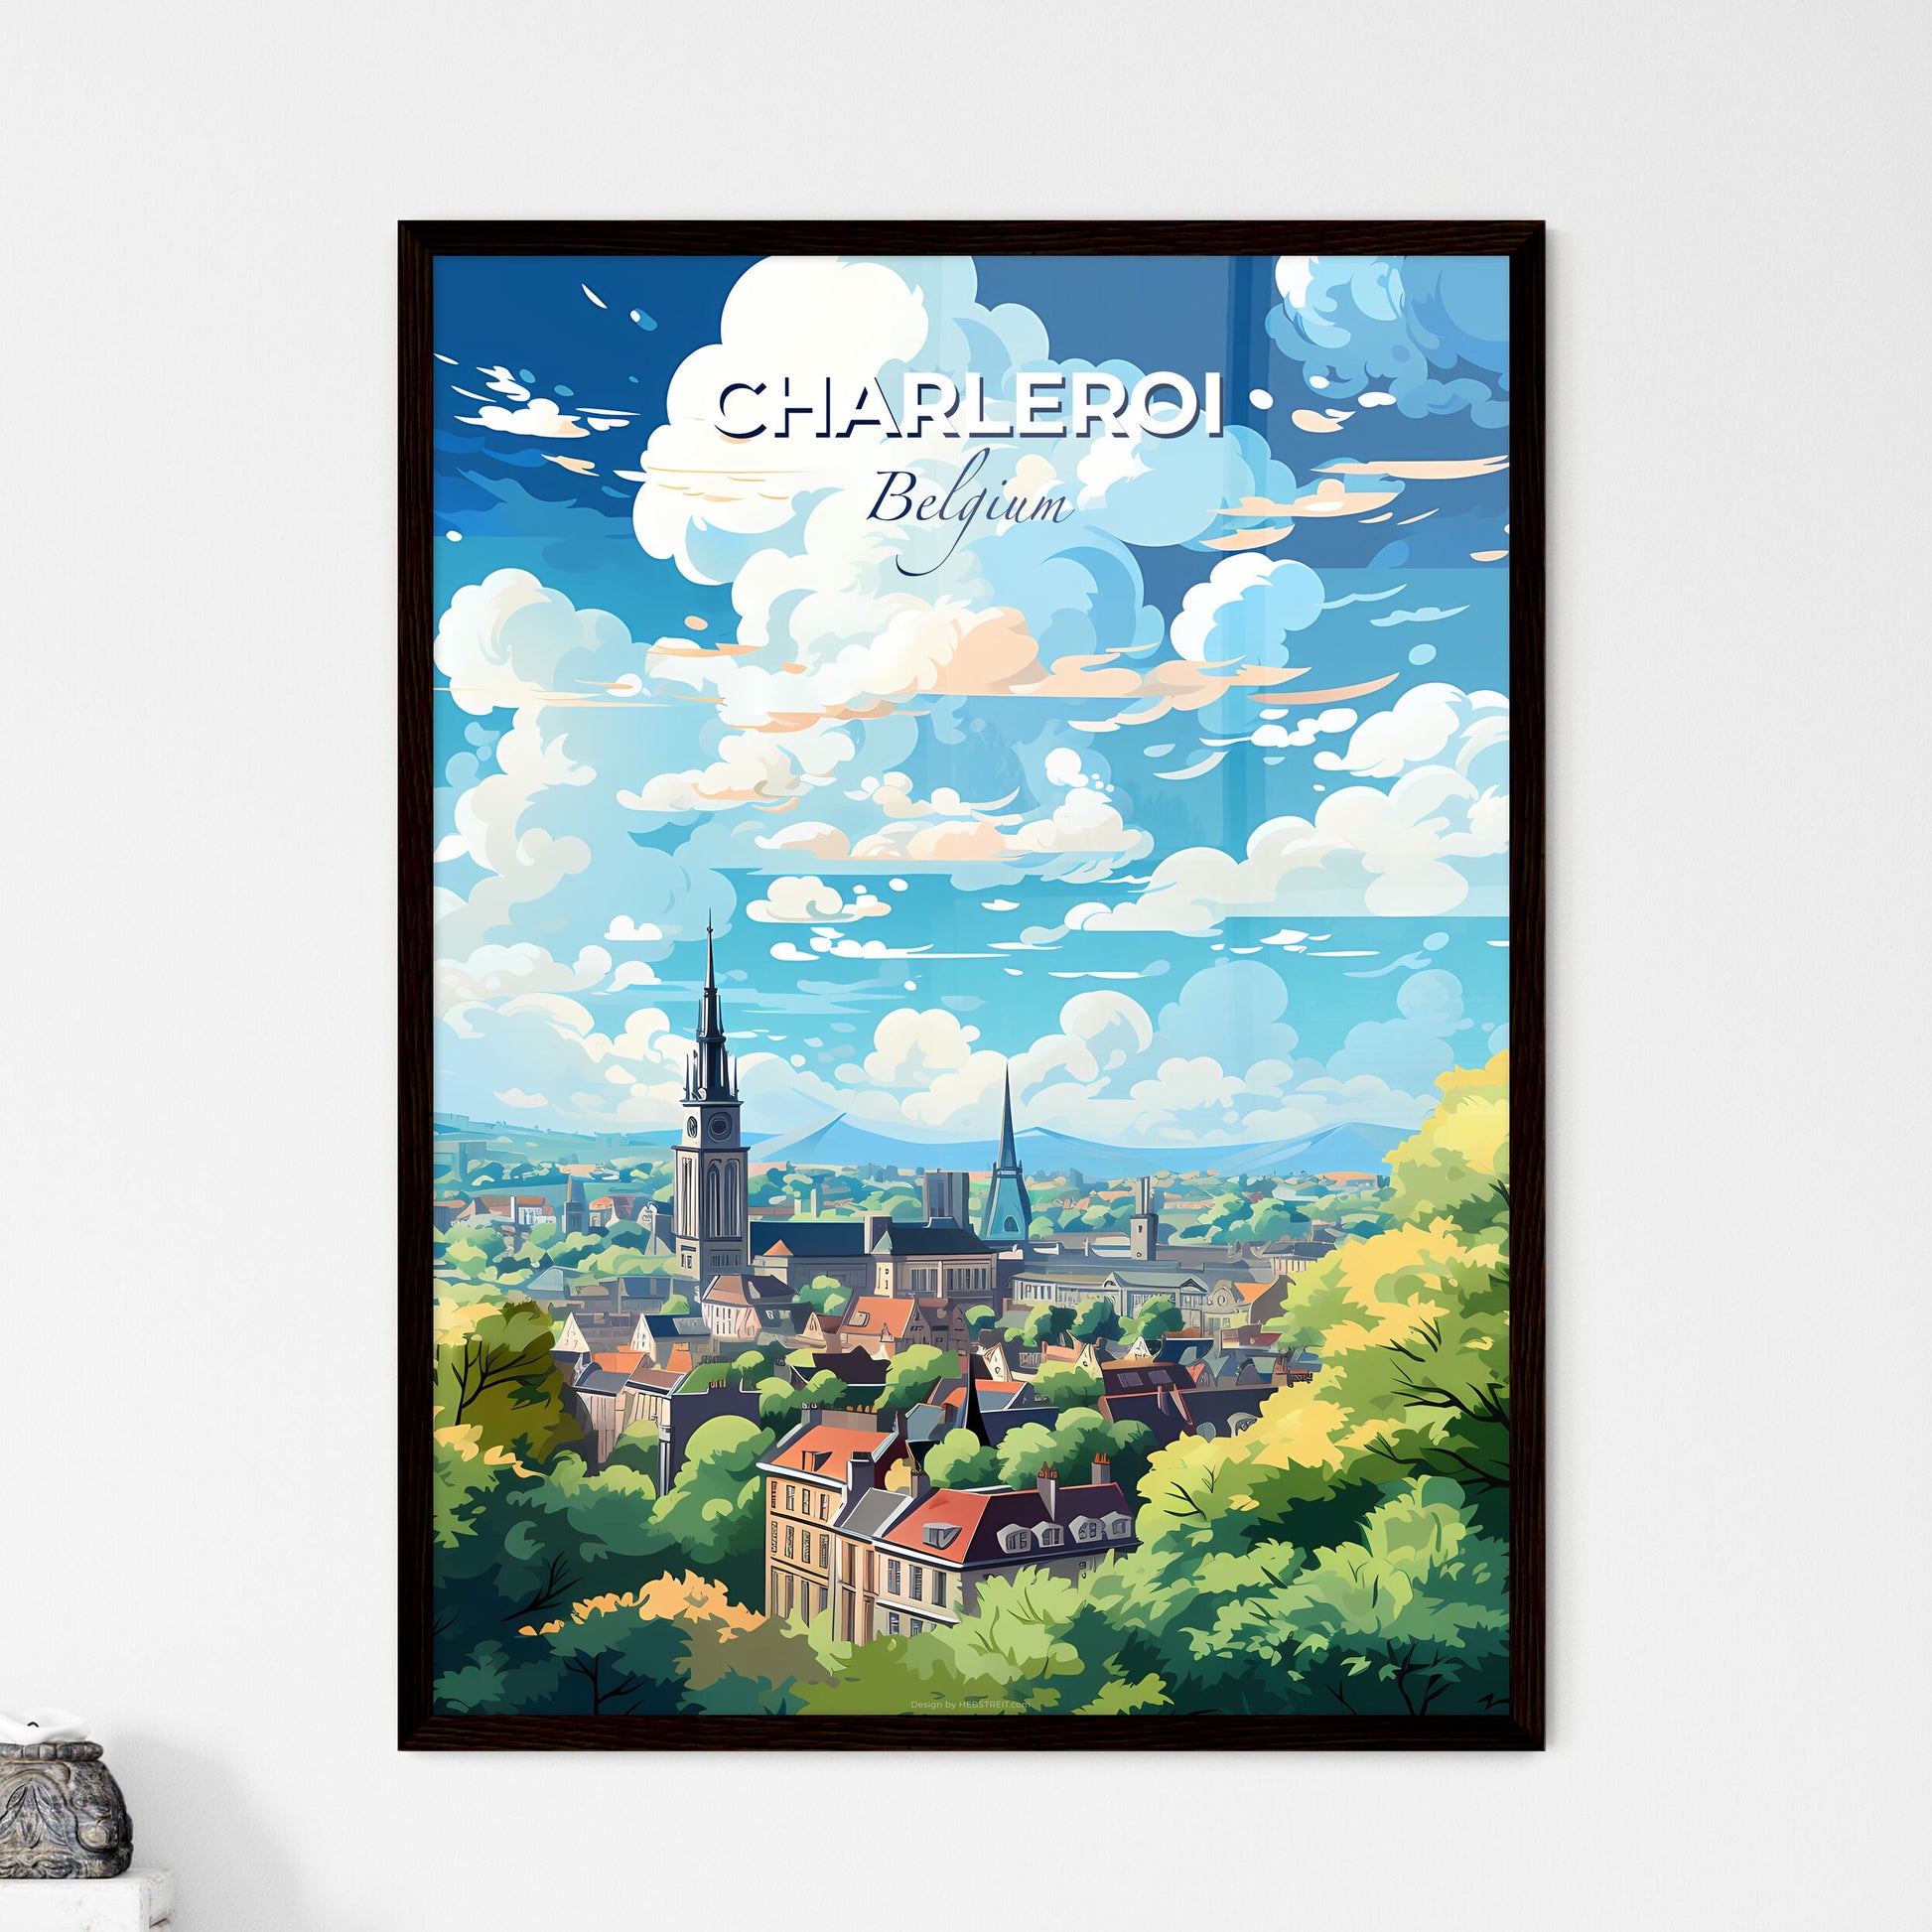 Charleroi Belgium Skyline - A City Landscape With Trees And Blue Sky - Customizable Travel Gift Default Title